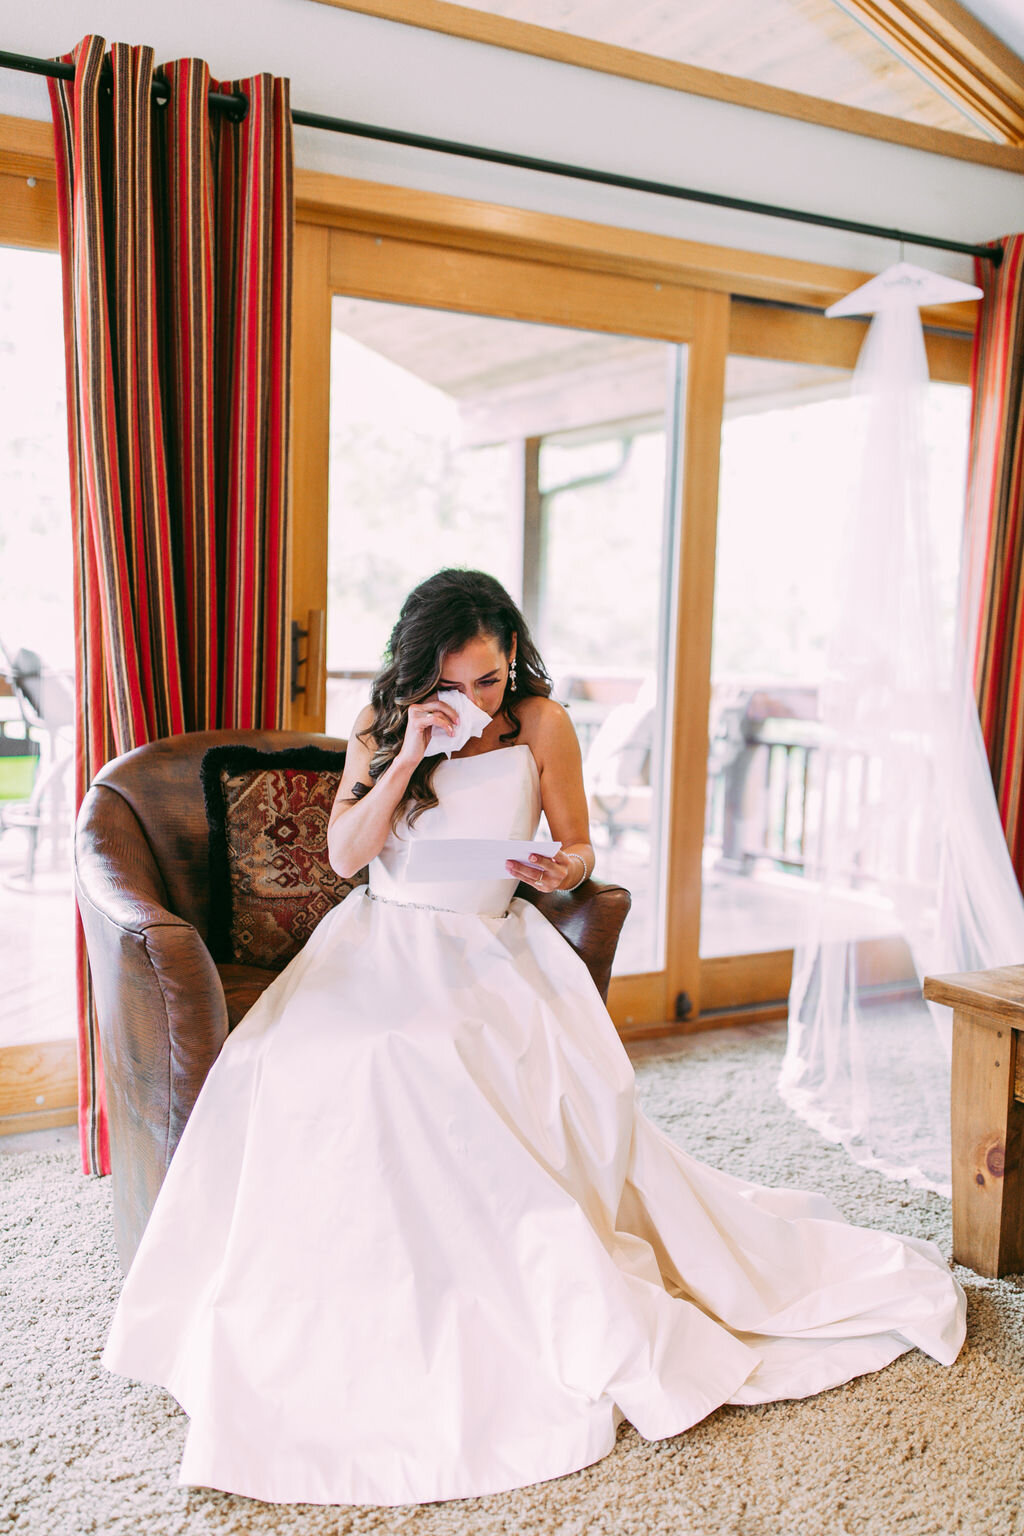 Touching moment as bride reads letter from groom